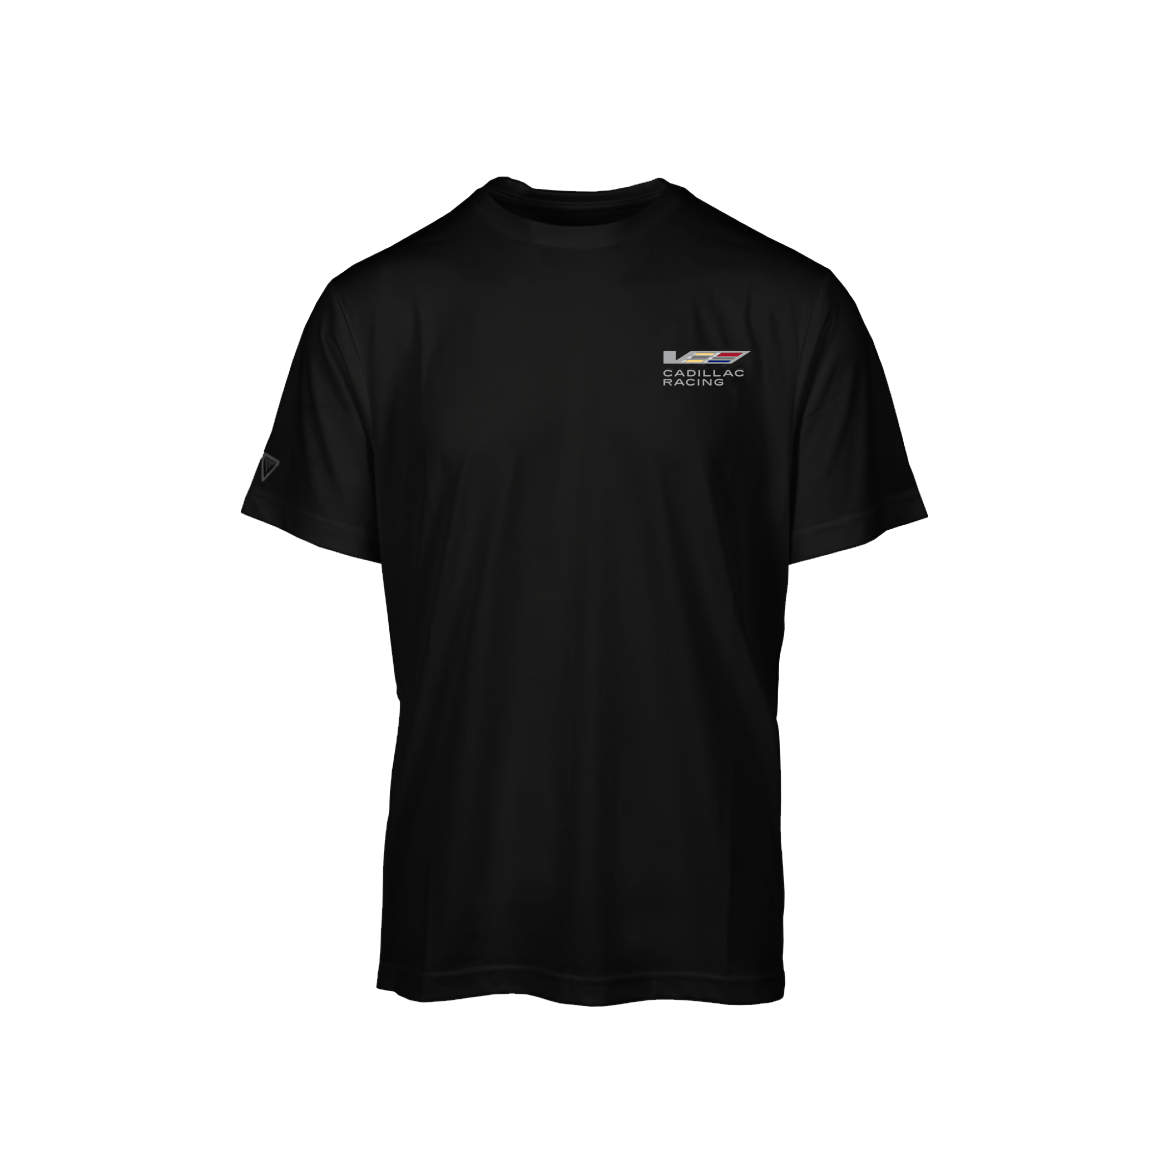 Cadillac Racing Men's Anthem Performance Tee by Levelwear